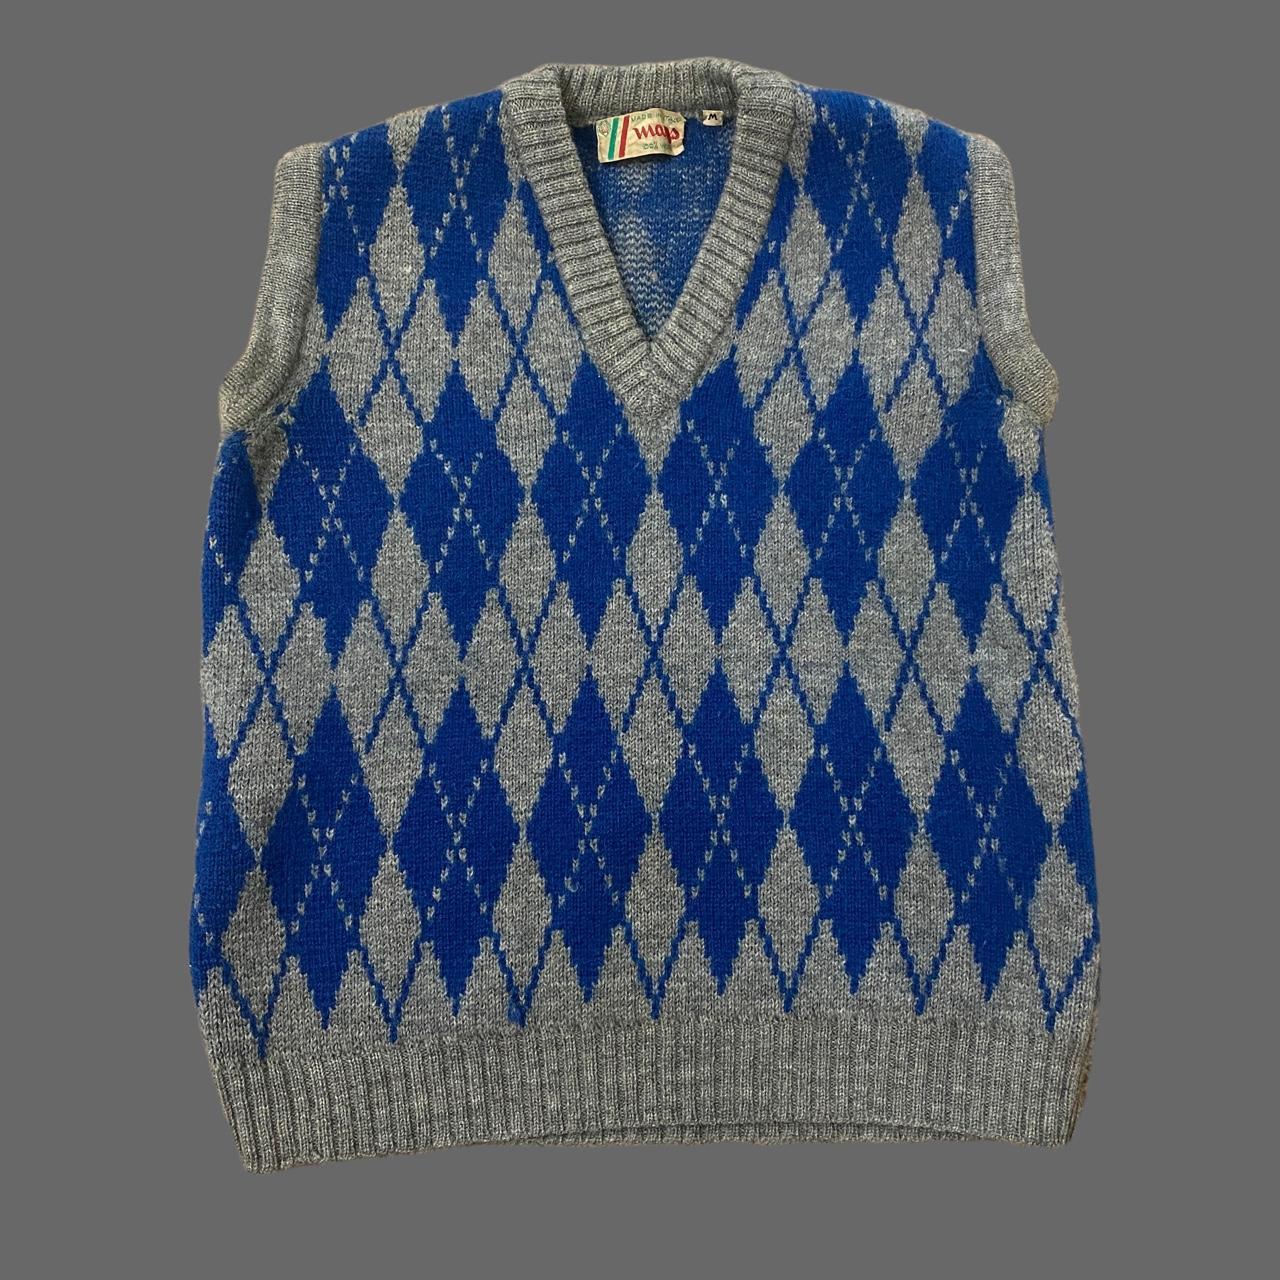 Product Image 1 - Vintage Argyle Sweater Vest.

-Made in